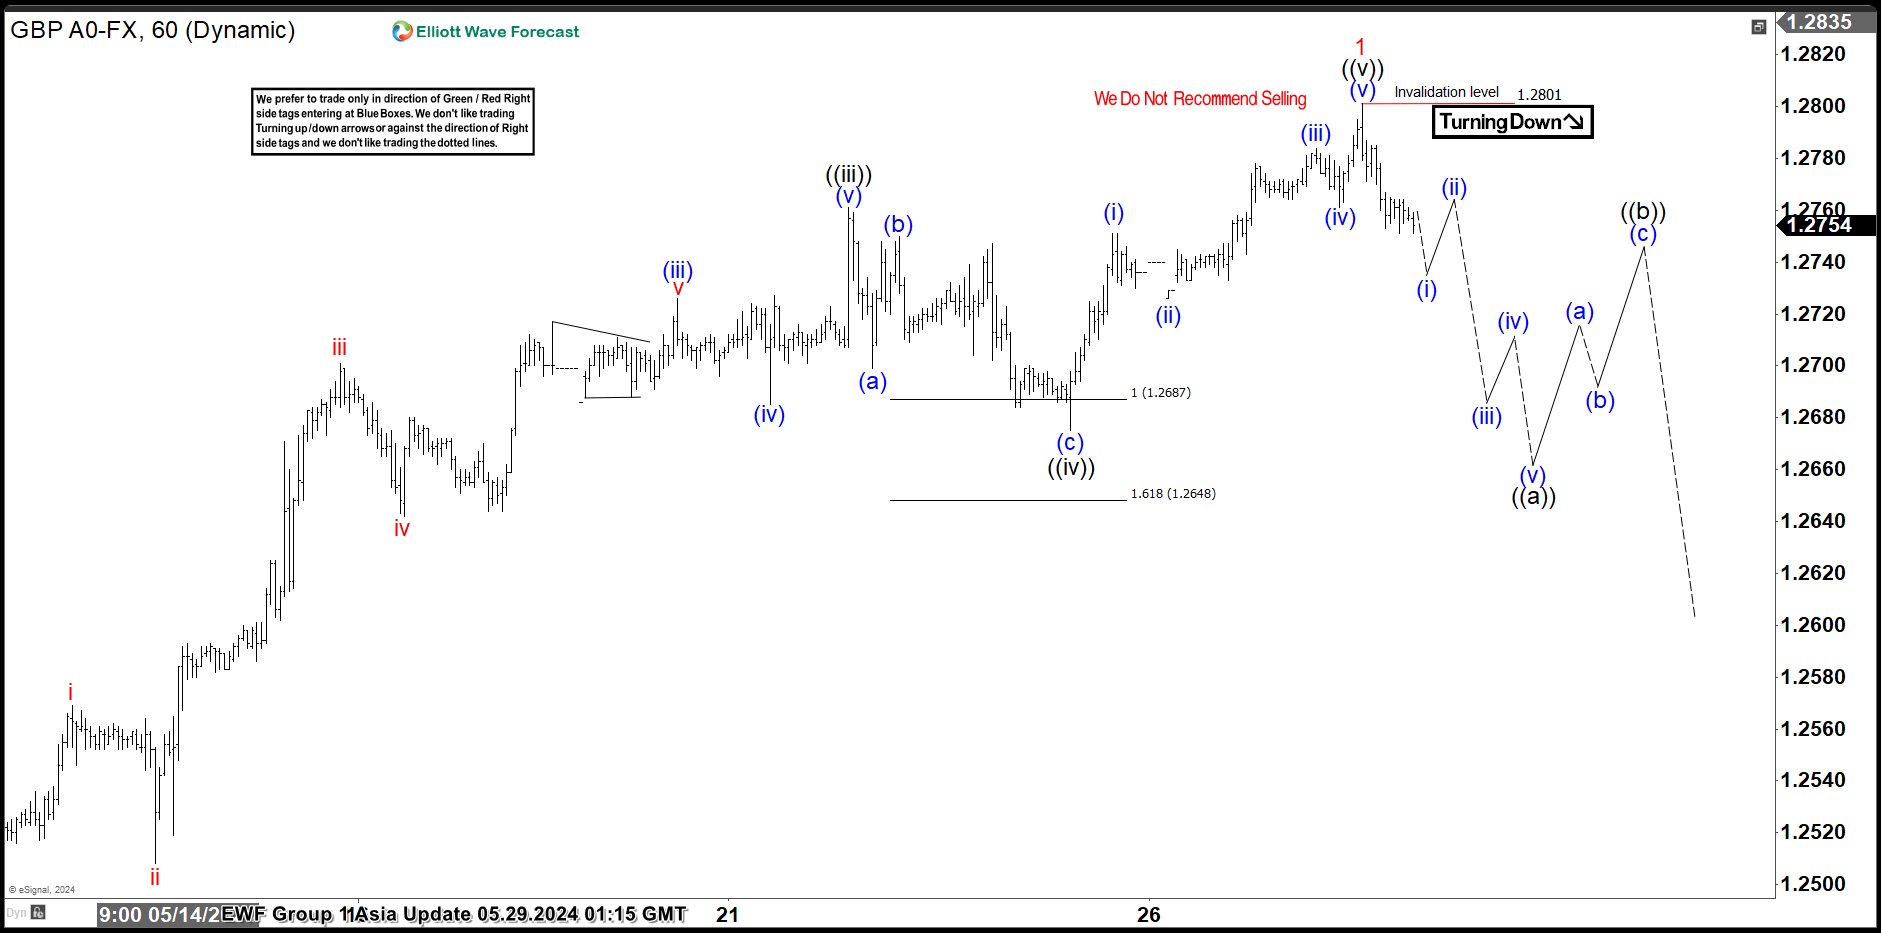 Elliott Wave Analysis Expects GBPUSD to Pullback in Wave 2